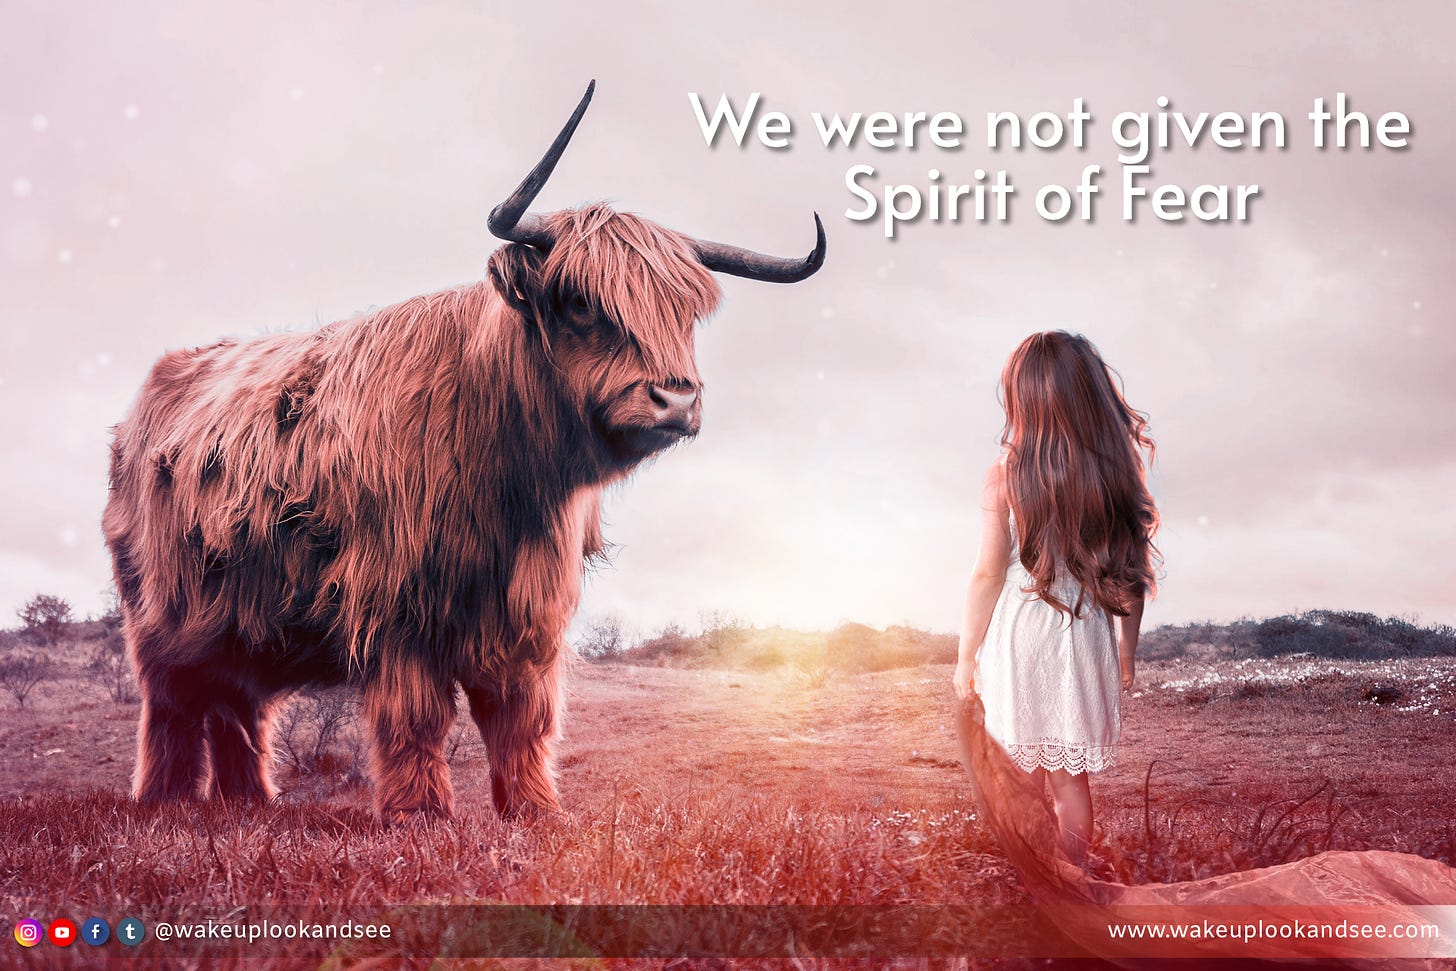 We were not given the Spirit of Fear